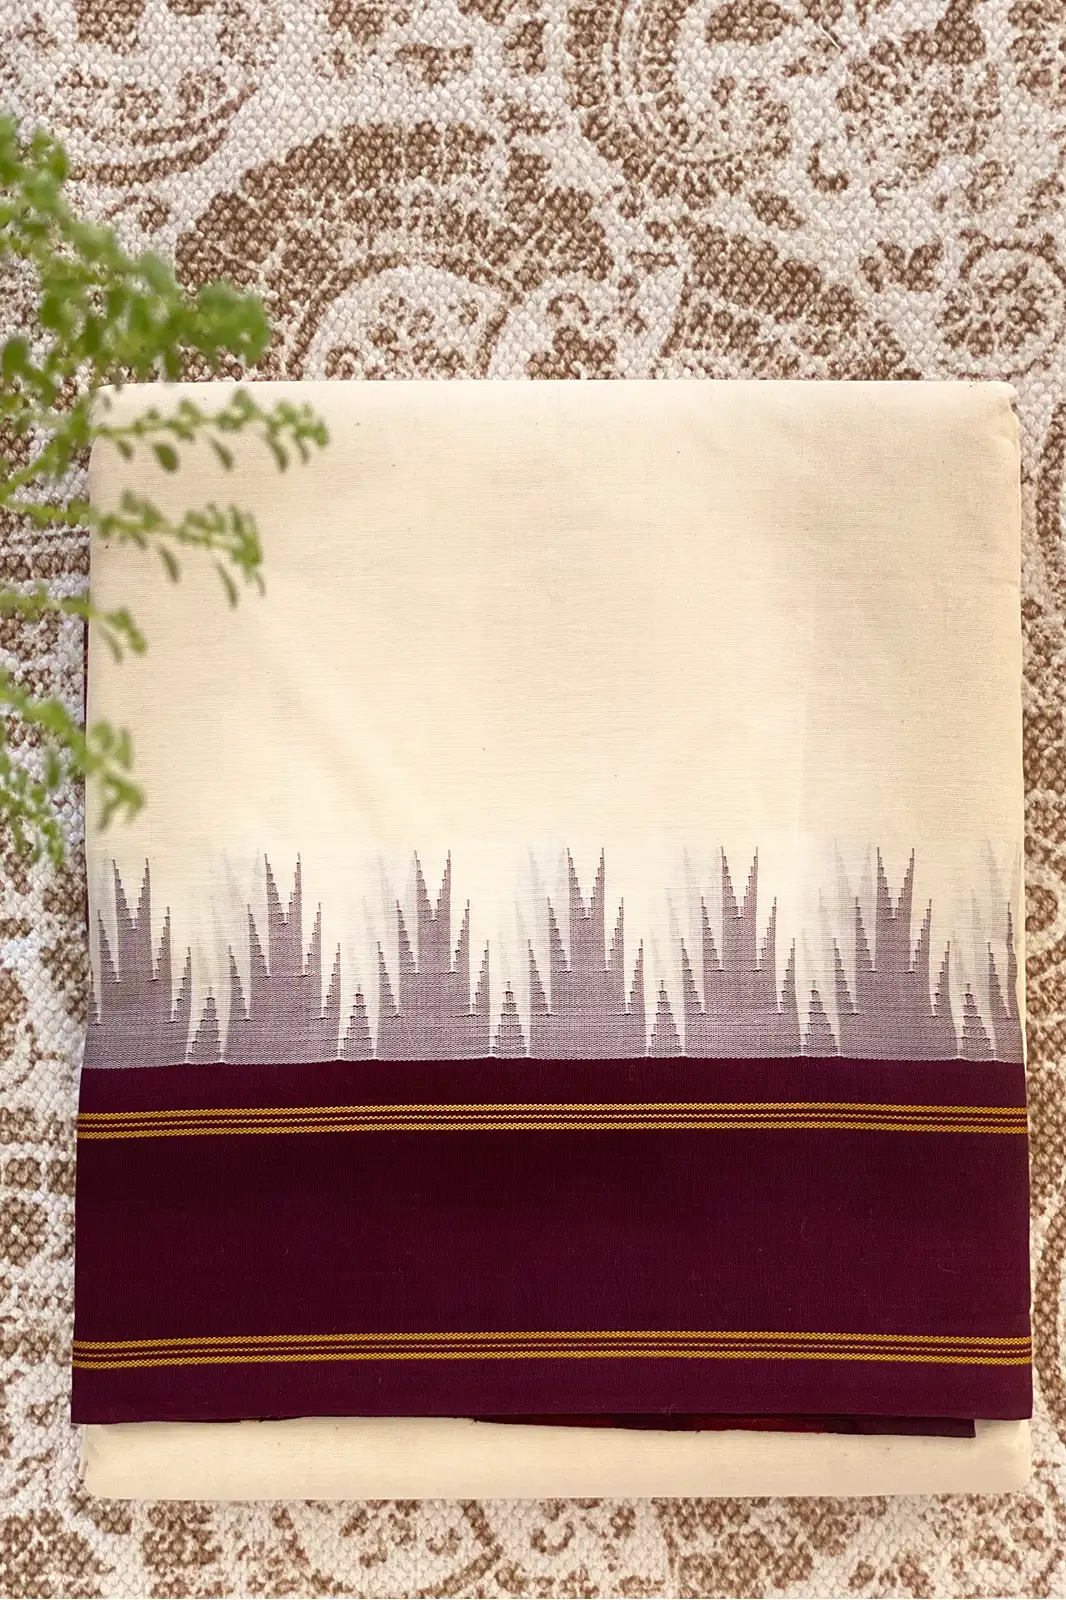 sodoh natural cotton dhoti, printed dhoti men's, indian traditional clothes shop, handloom cotton dhoti, cotton silk dhoti, best cotton dhoti, sepia stories, handloom cotton dhoti, cotton dhoti near me, cotton white dhoti, pure cotton dhoti price, organic cotton dhoti, best cotton dhoti, cotton white dhoti, cotton dhoti for pooja, cotton readymade dhoti, organic cotton dhoti, green cotton dhoti pants, dhoti traditional, organic cotton dhoti, readymade dhoti price, men's pattu dhoti, printed dhoti kurta, printed cotton dhoti pants, printed dhoti men's, printed dhoti style dress, Indian traditional clothes, indian traditional clothes shop, sustainable clothing brand, handwoven men clothing, handmade men clothing store,